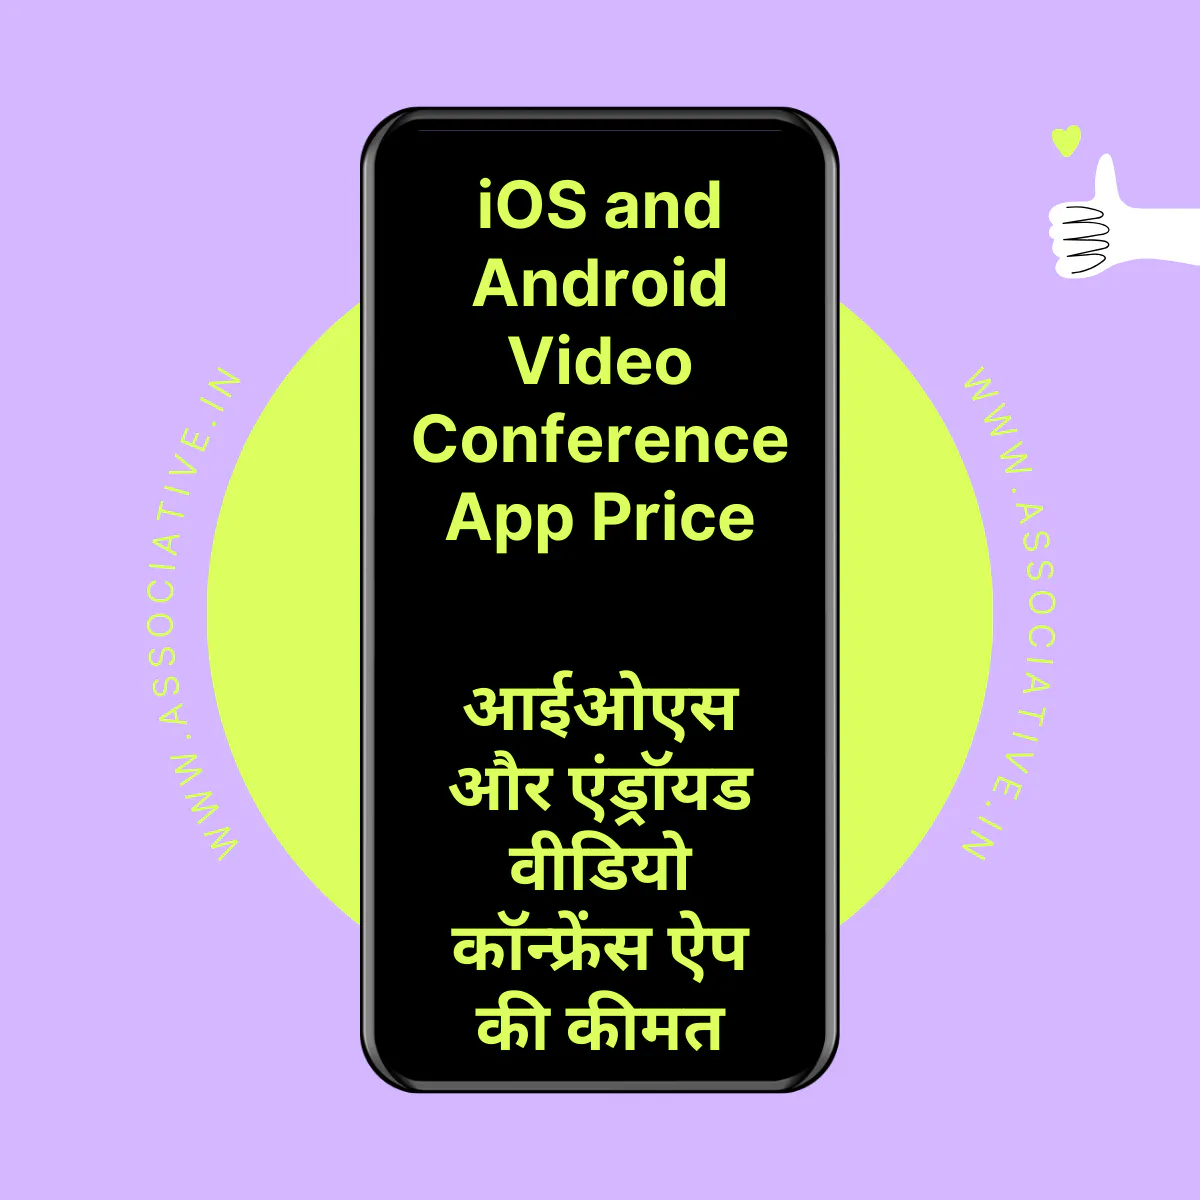 iOS and Android Video Conference App